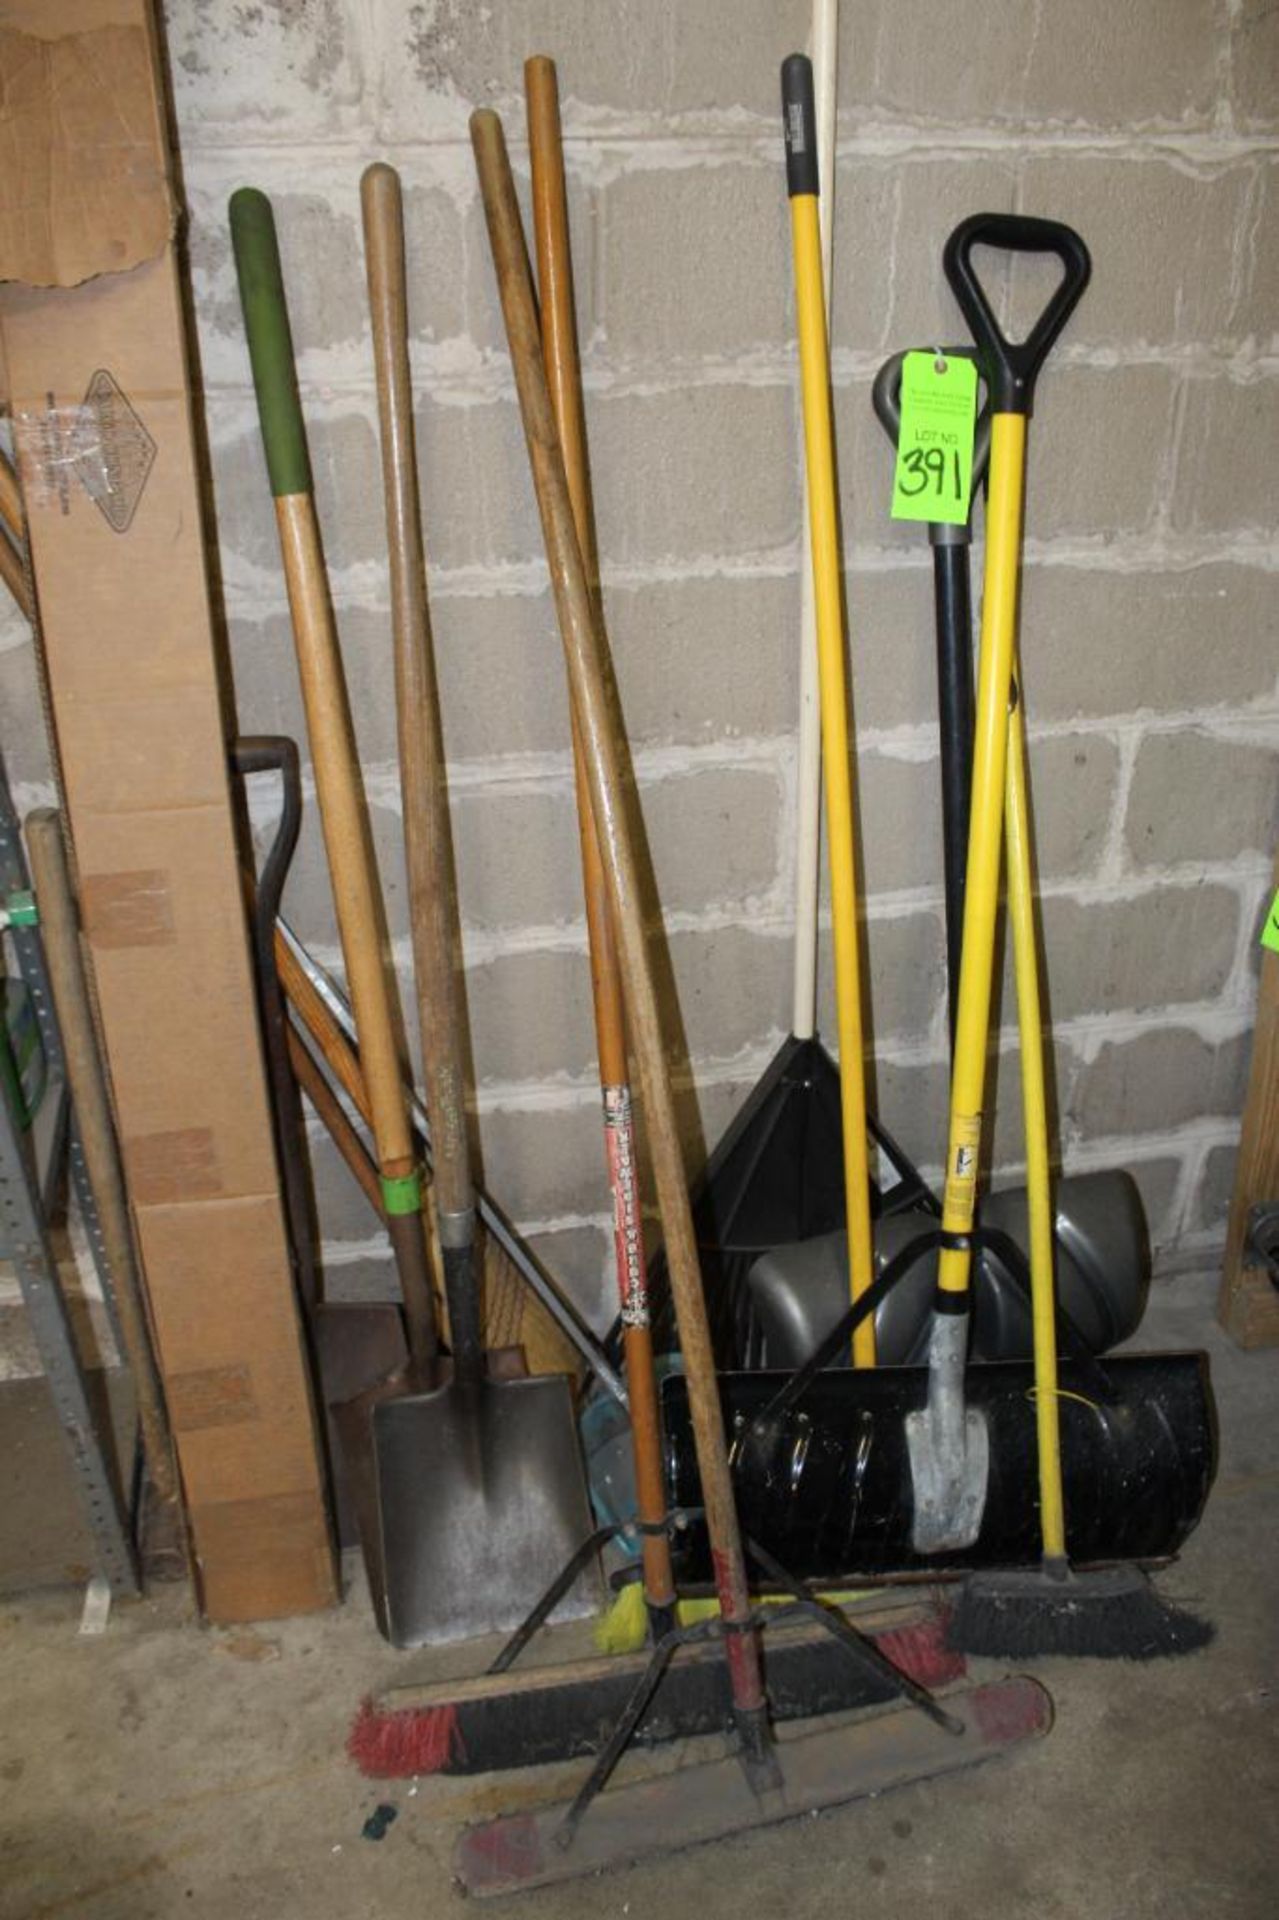 Lot of Brooms and Shovels